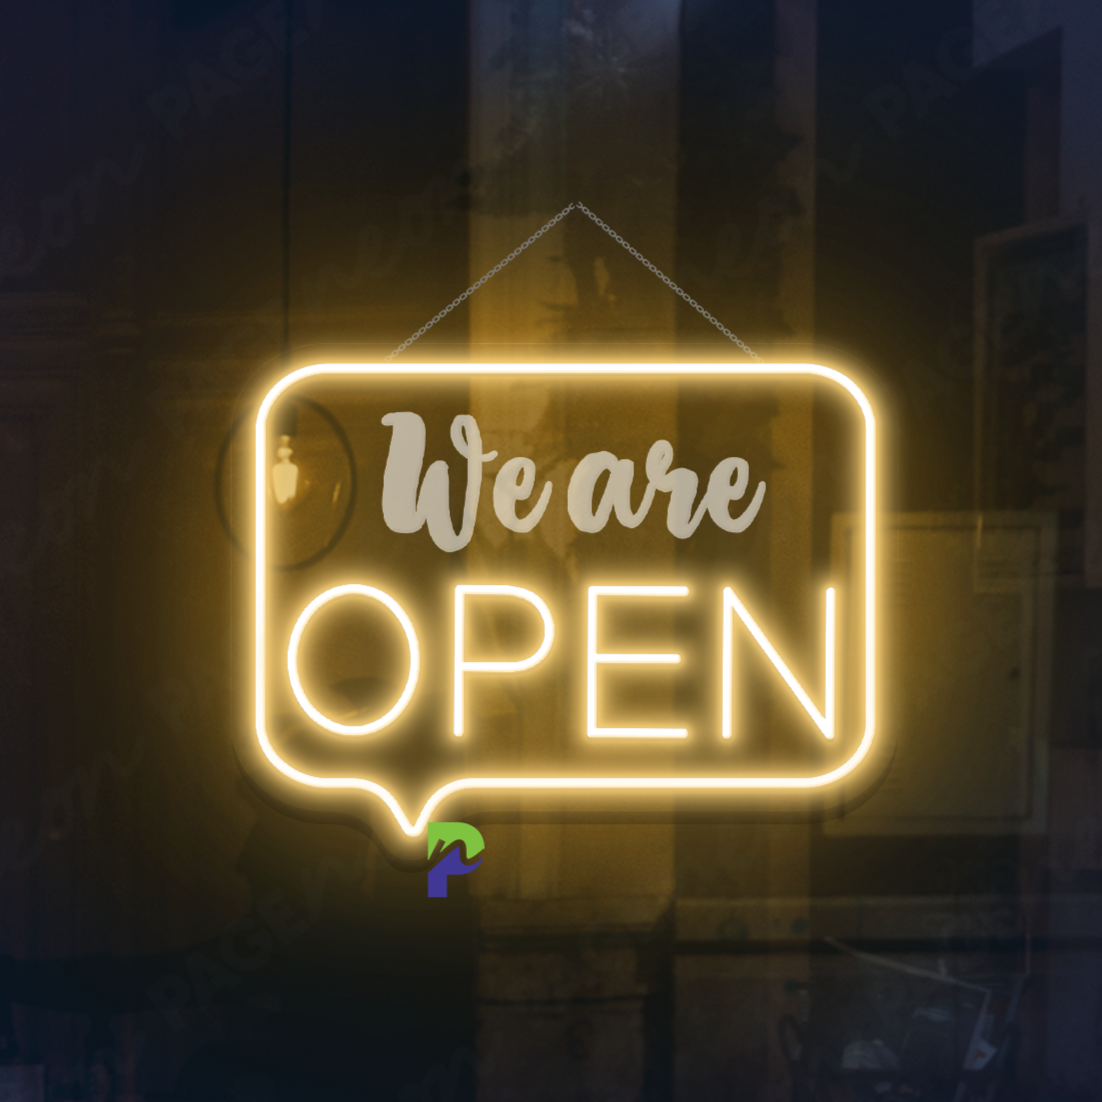 We Are Open Neon Sign Cheap Led Light